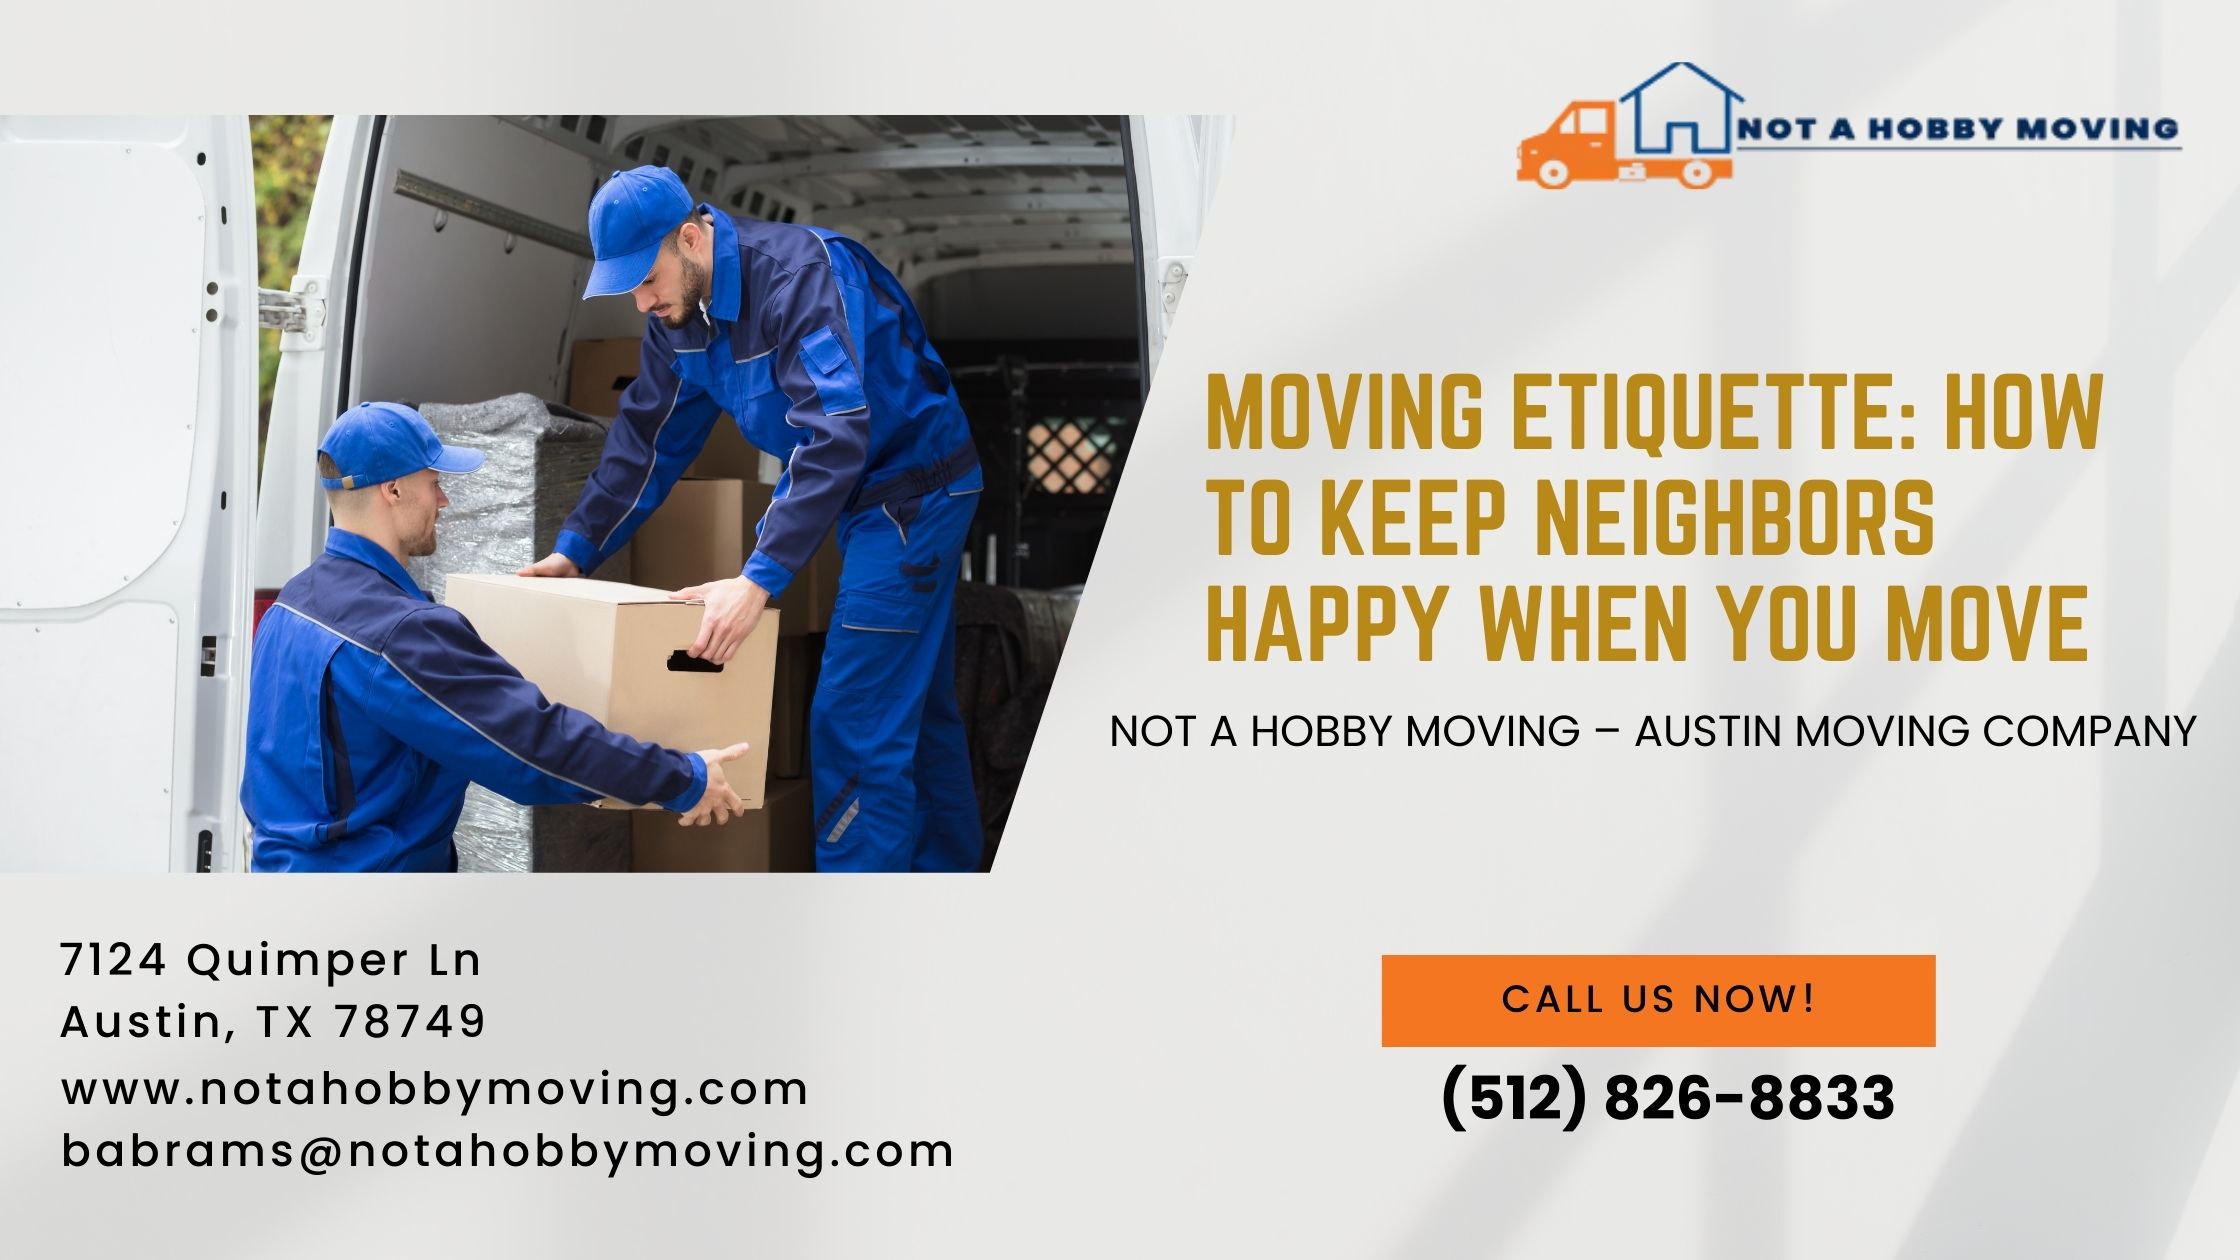 Moving Etiquette: How To Keep Neighbors Happy When You Move